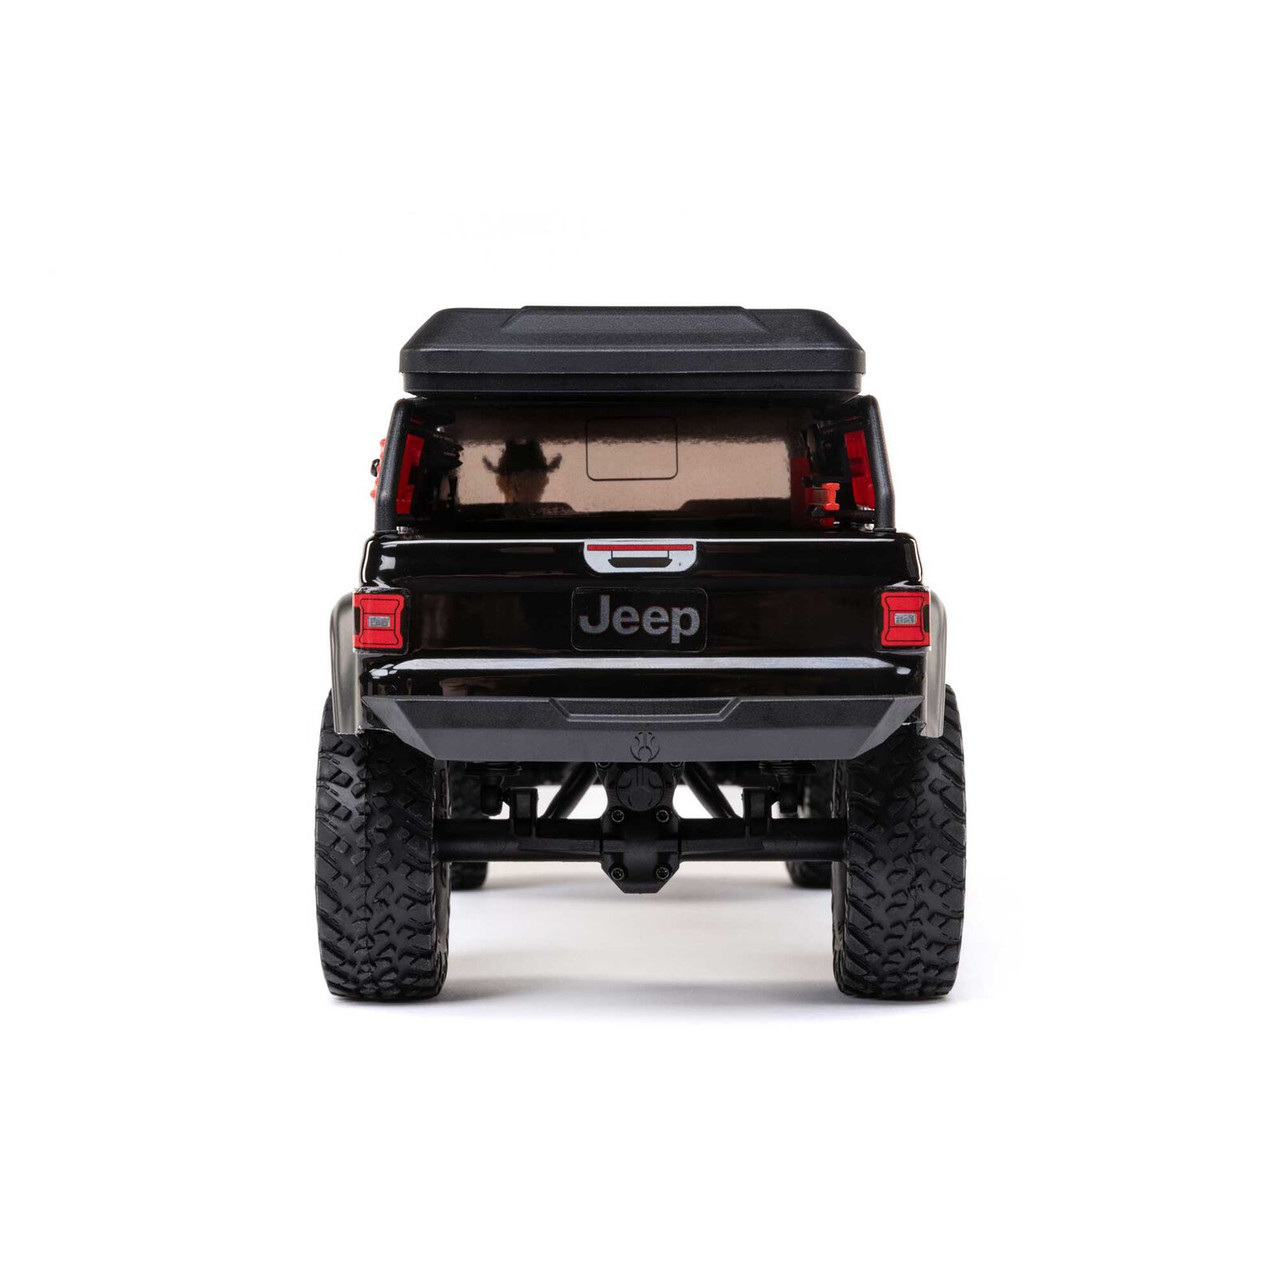 Axial SCX24 Jeep JT Gladiator 4WD Rock Crawler Brushed RTR, Black